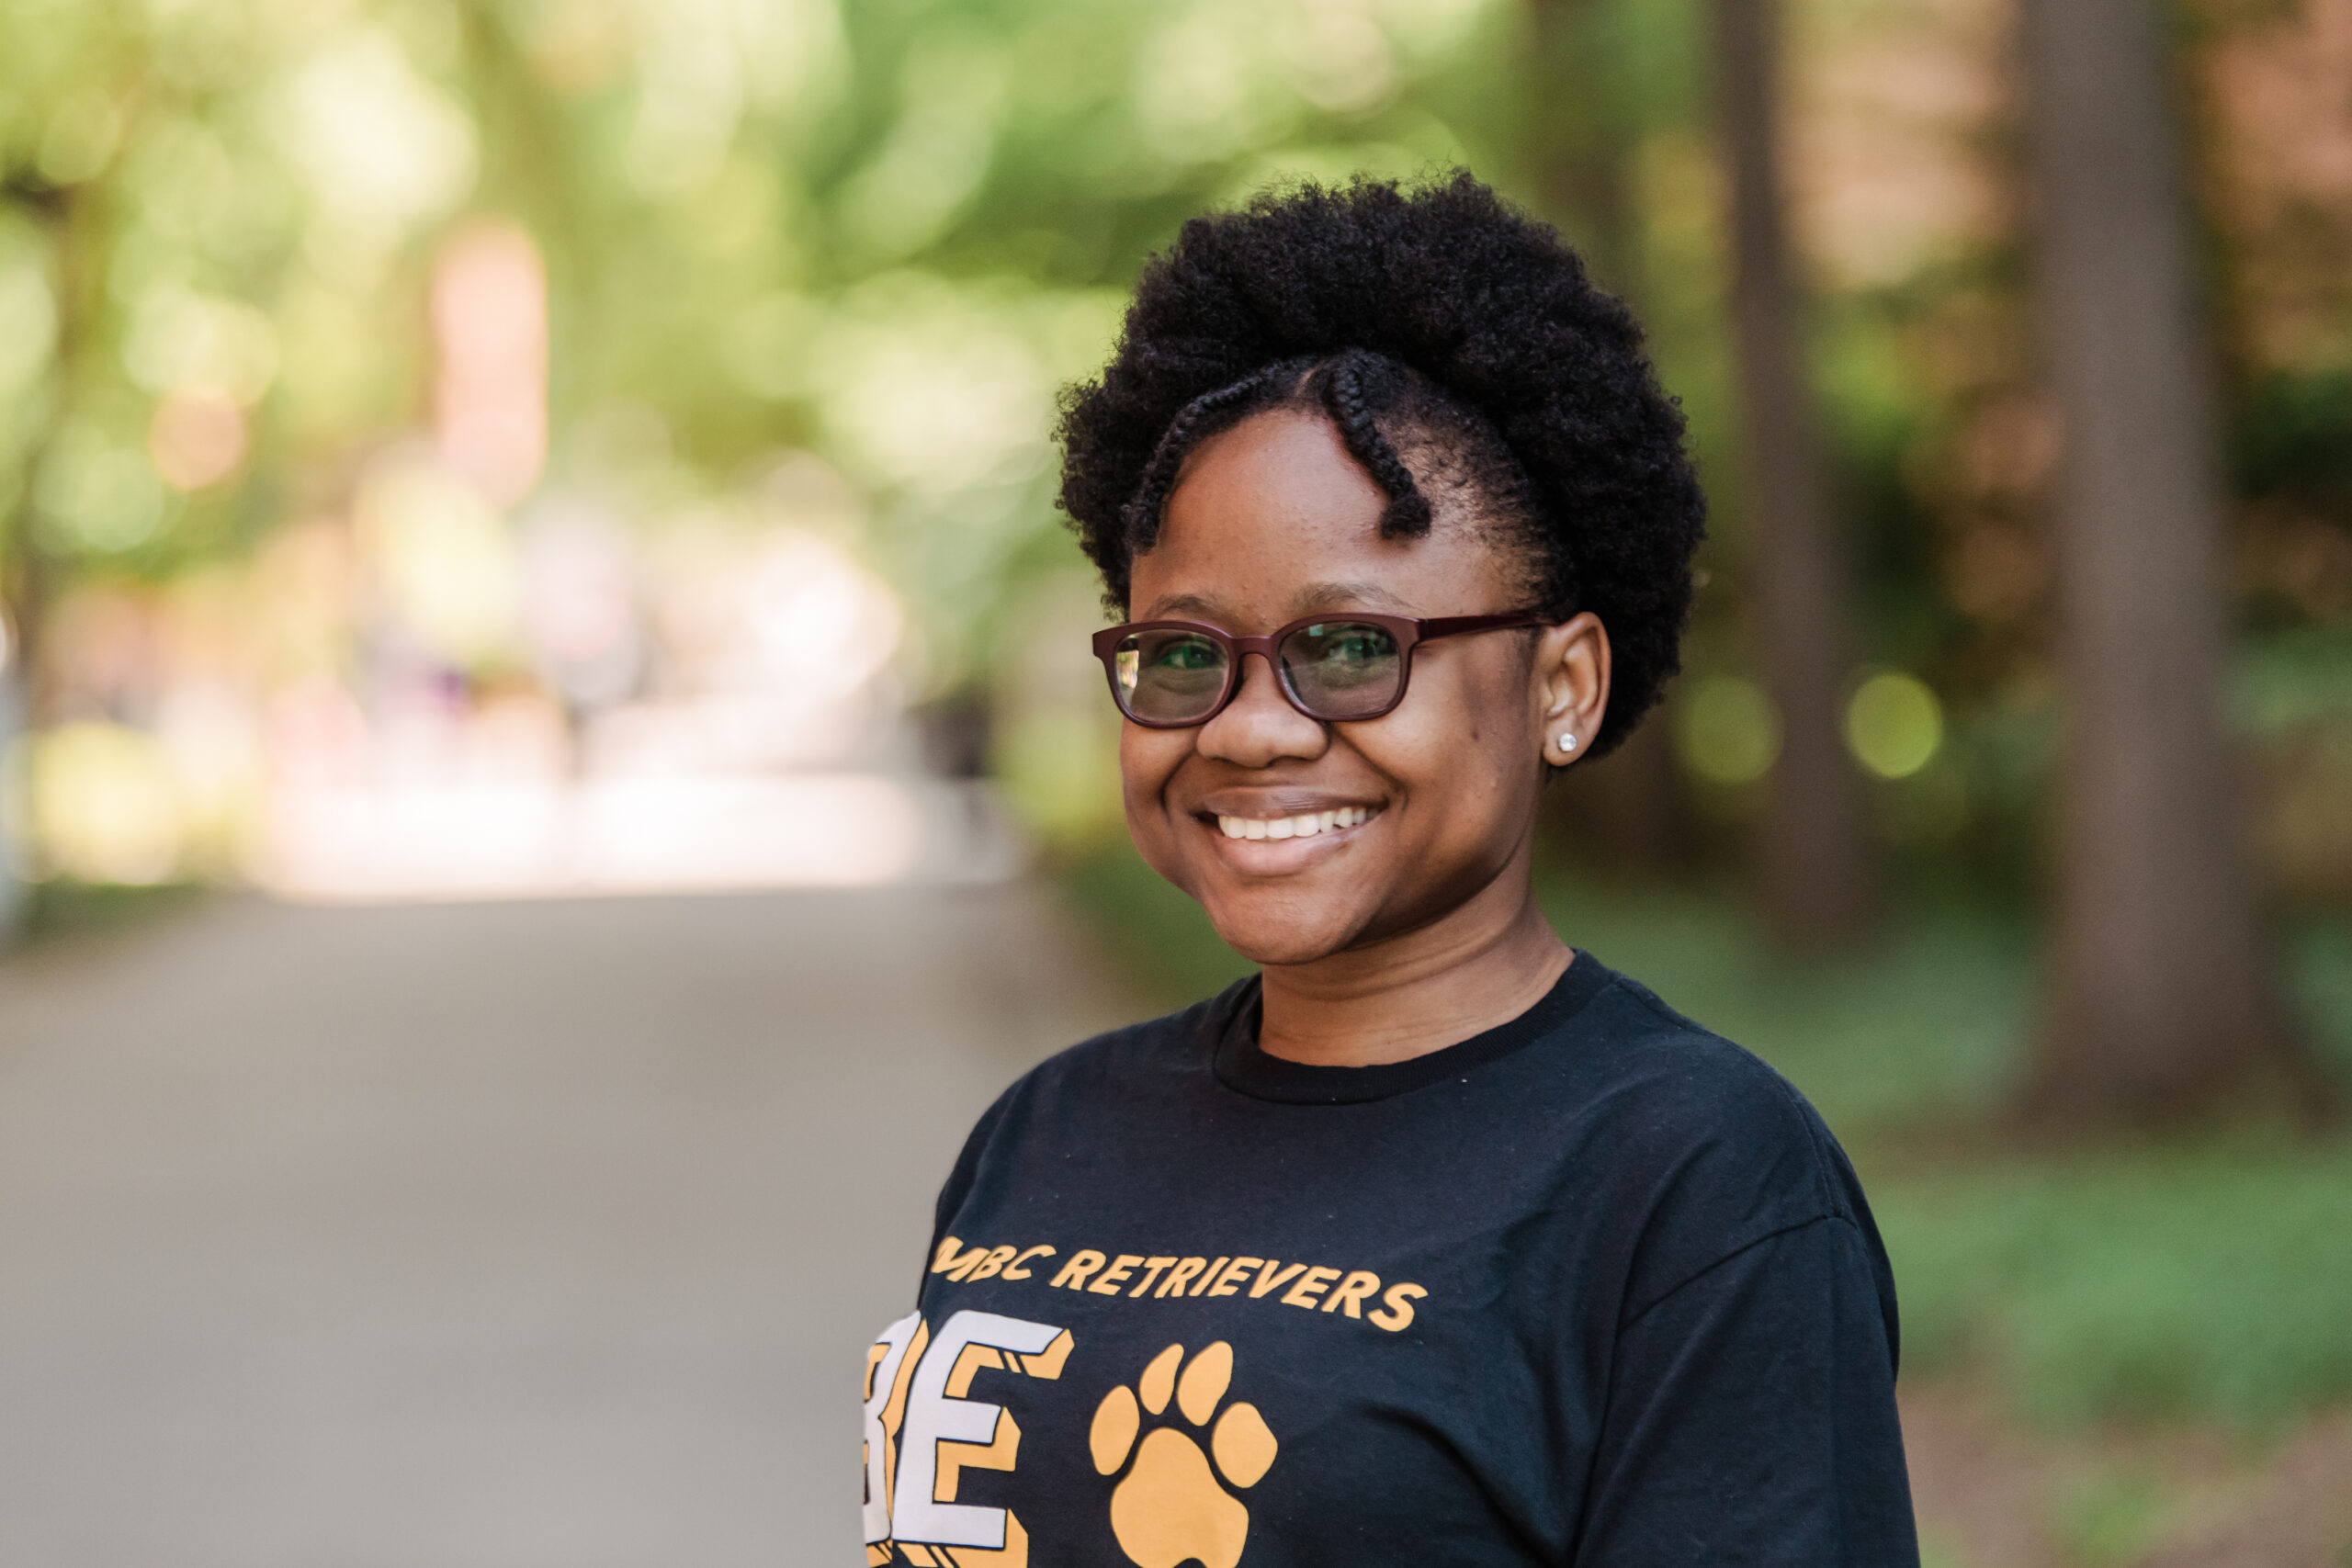 A college student wearing a black and gold t-shirt standing on a walk way in a college campus